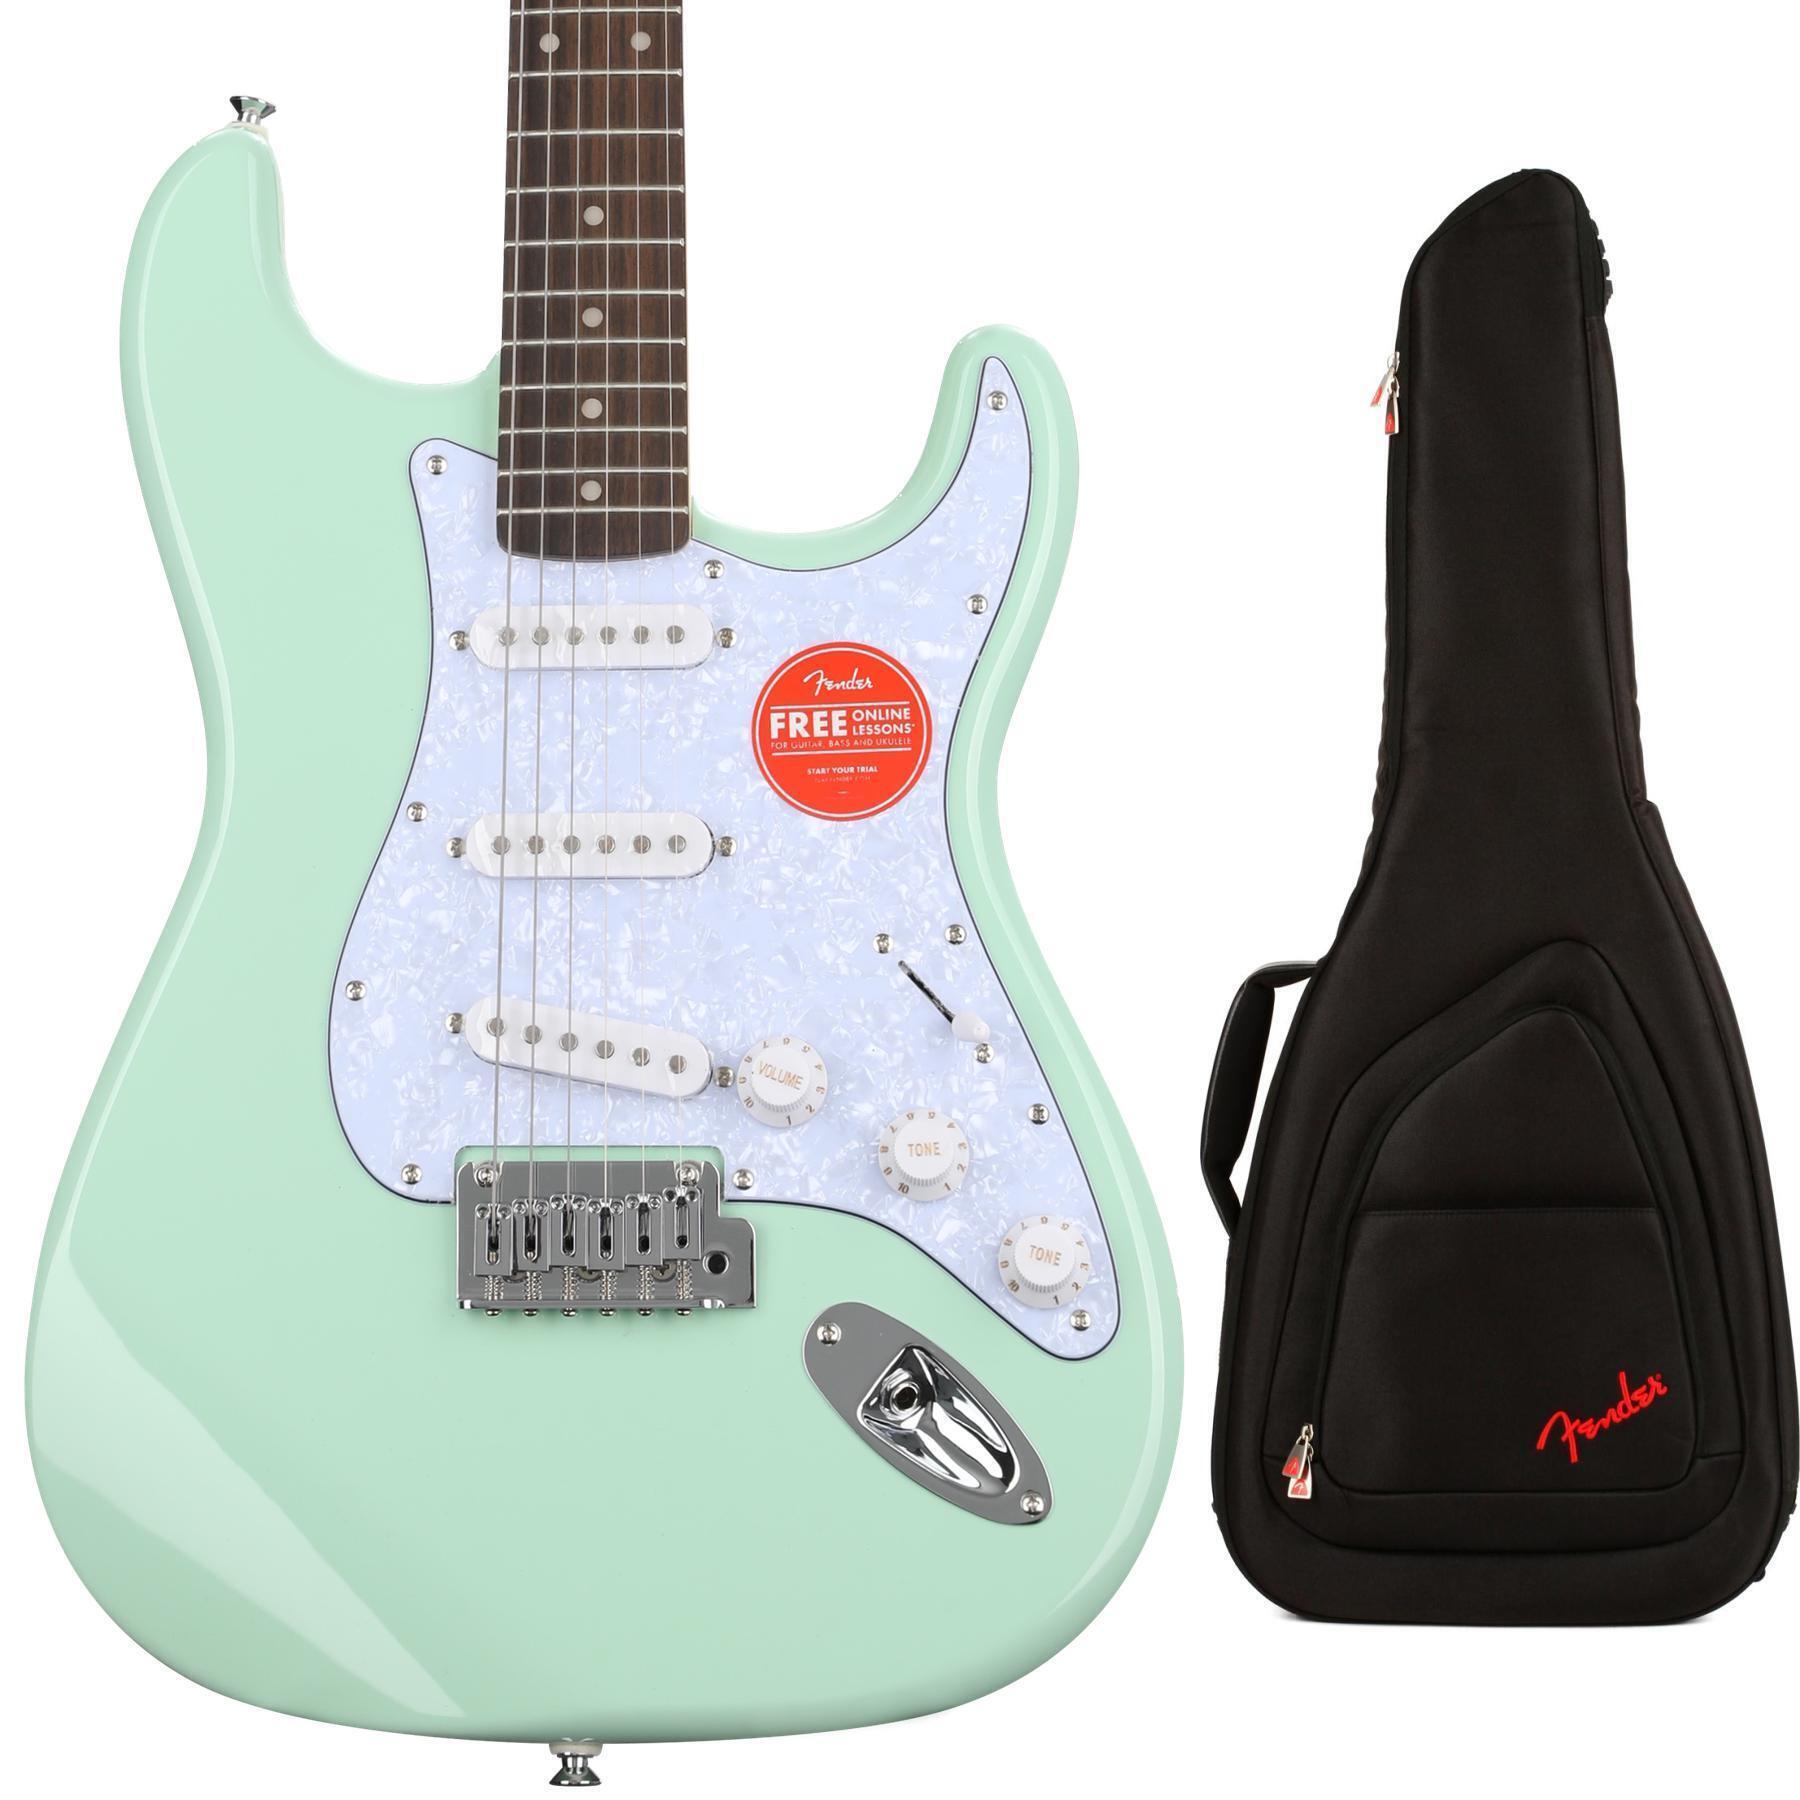 Squier Affinity Series Stratocaster with Gig Bag - Surf Green with White  Pearloid Pickguard, Sweetwater Exclusive in the USA